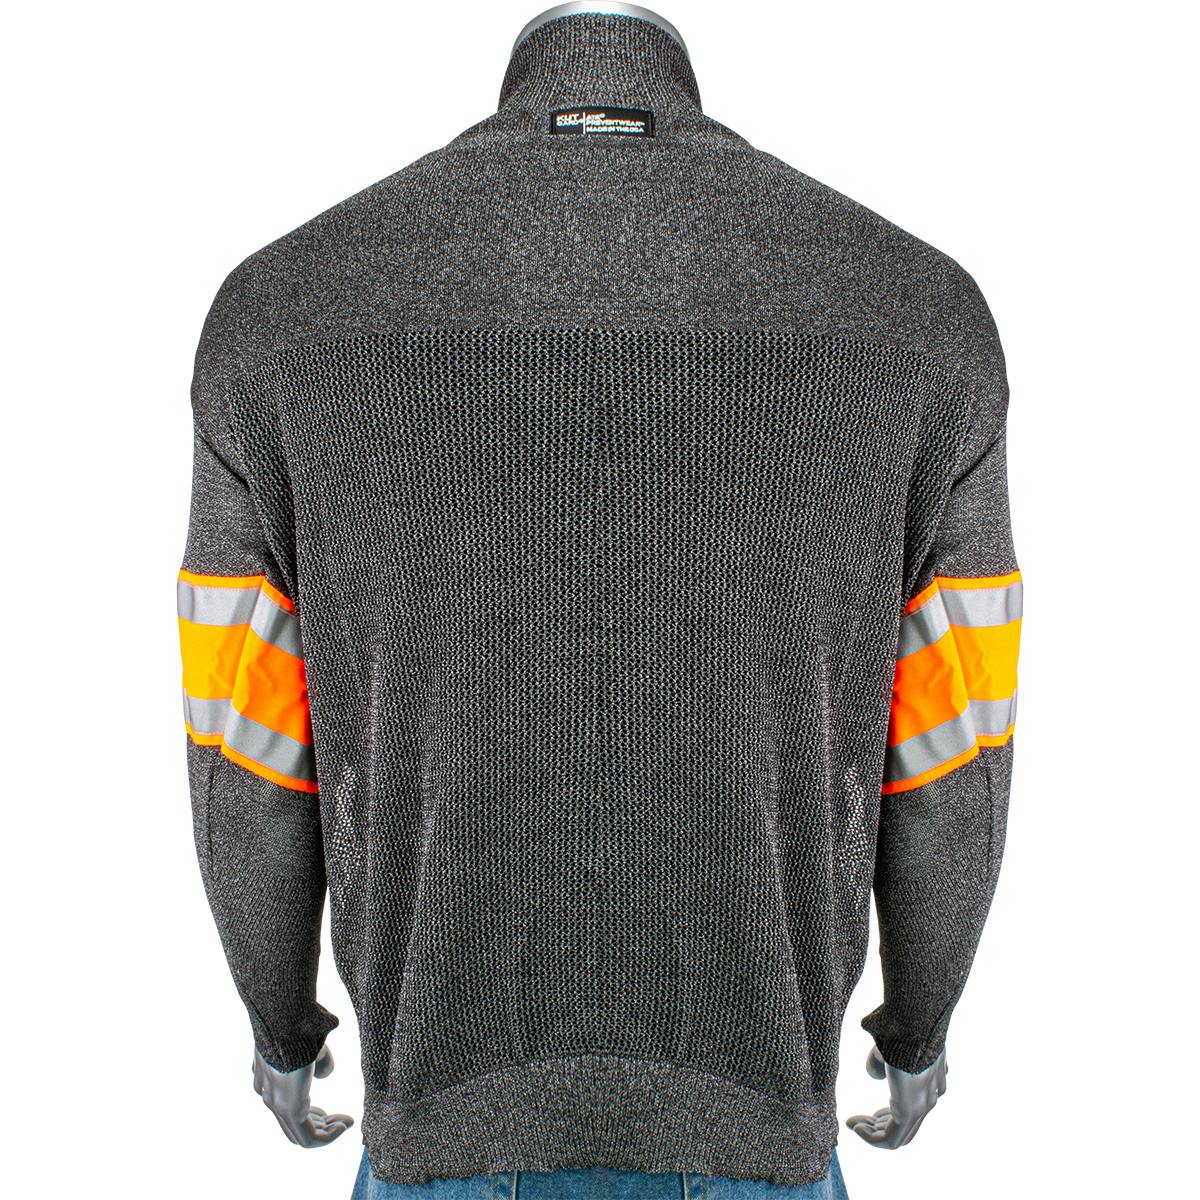 ATA® Blended Cut Resistant Pullover with Hi-Vis / Reflective Taped Sleeves and Thumb Loops, Dark Gray (P145SP-3CM-HV2-TL)